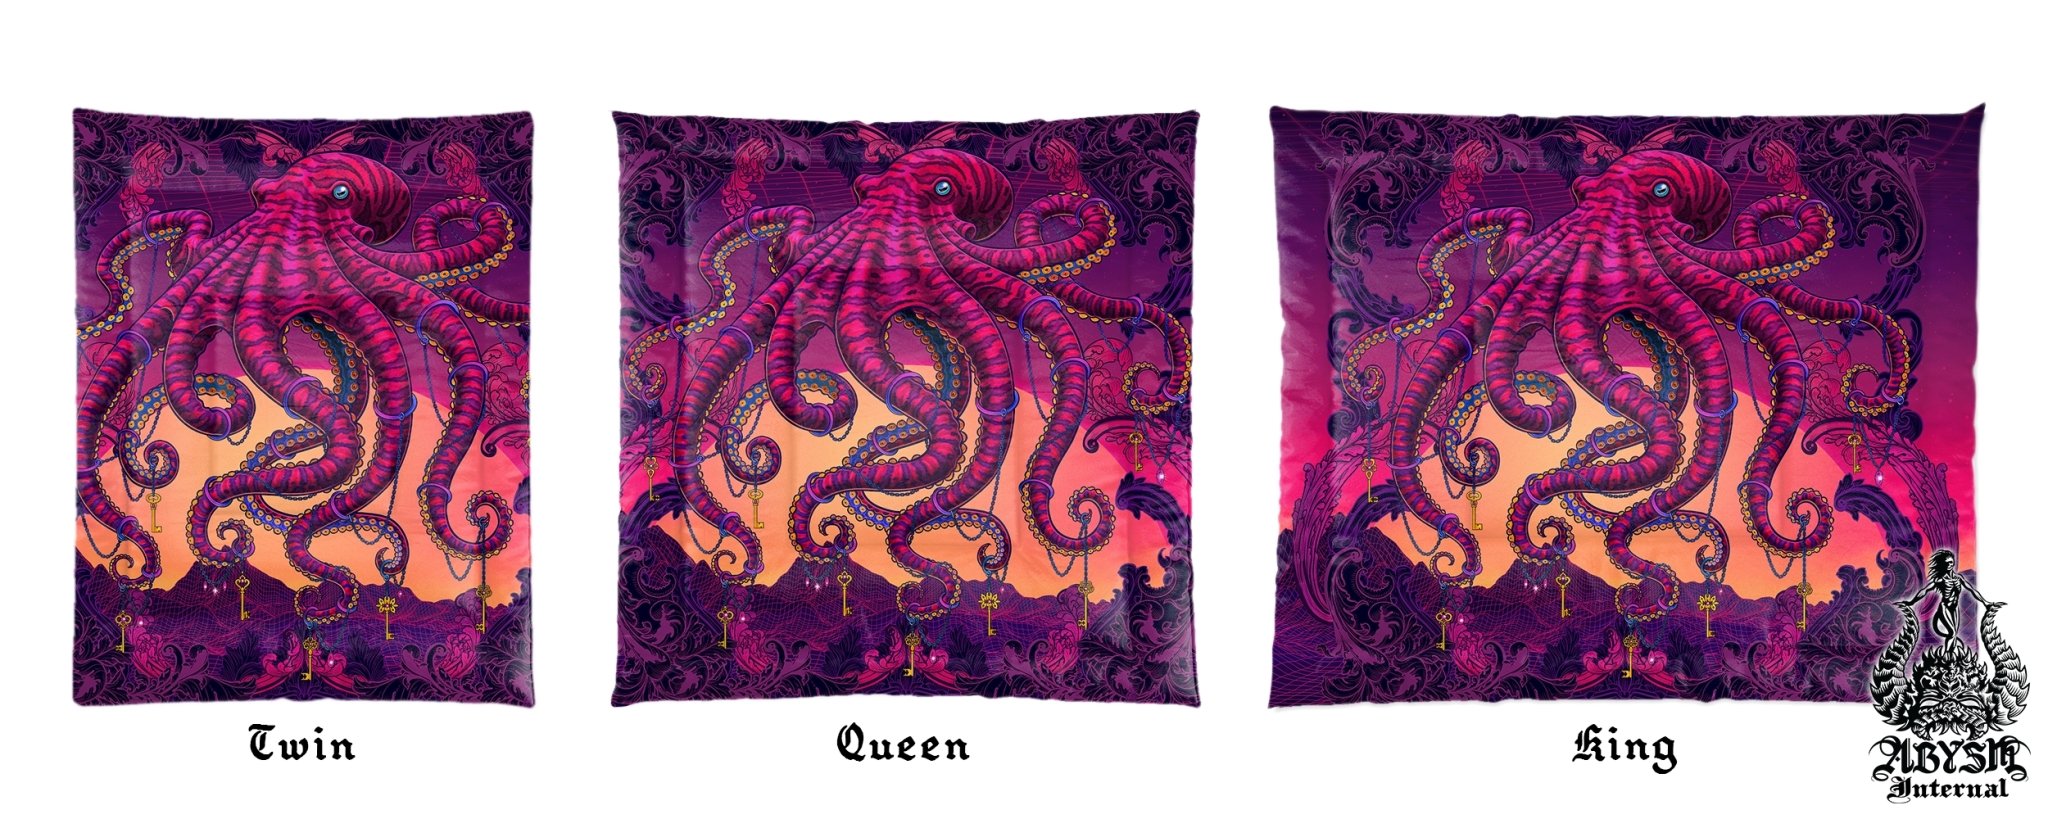 Vaporwave Bedding Set, Comforter and Duvet, Synthwave Bed Cover and Retrowave Bedroom Decor, King, Queen and Twin Size, Gamer Kids 80s Room - Psychedelic Octopus - Abysm Internal